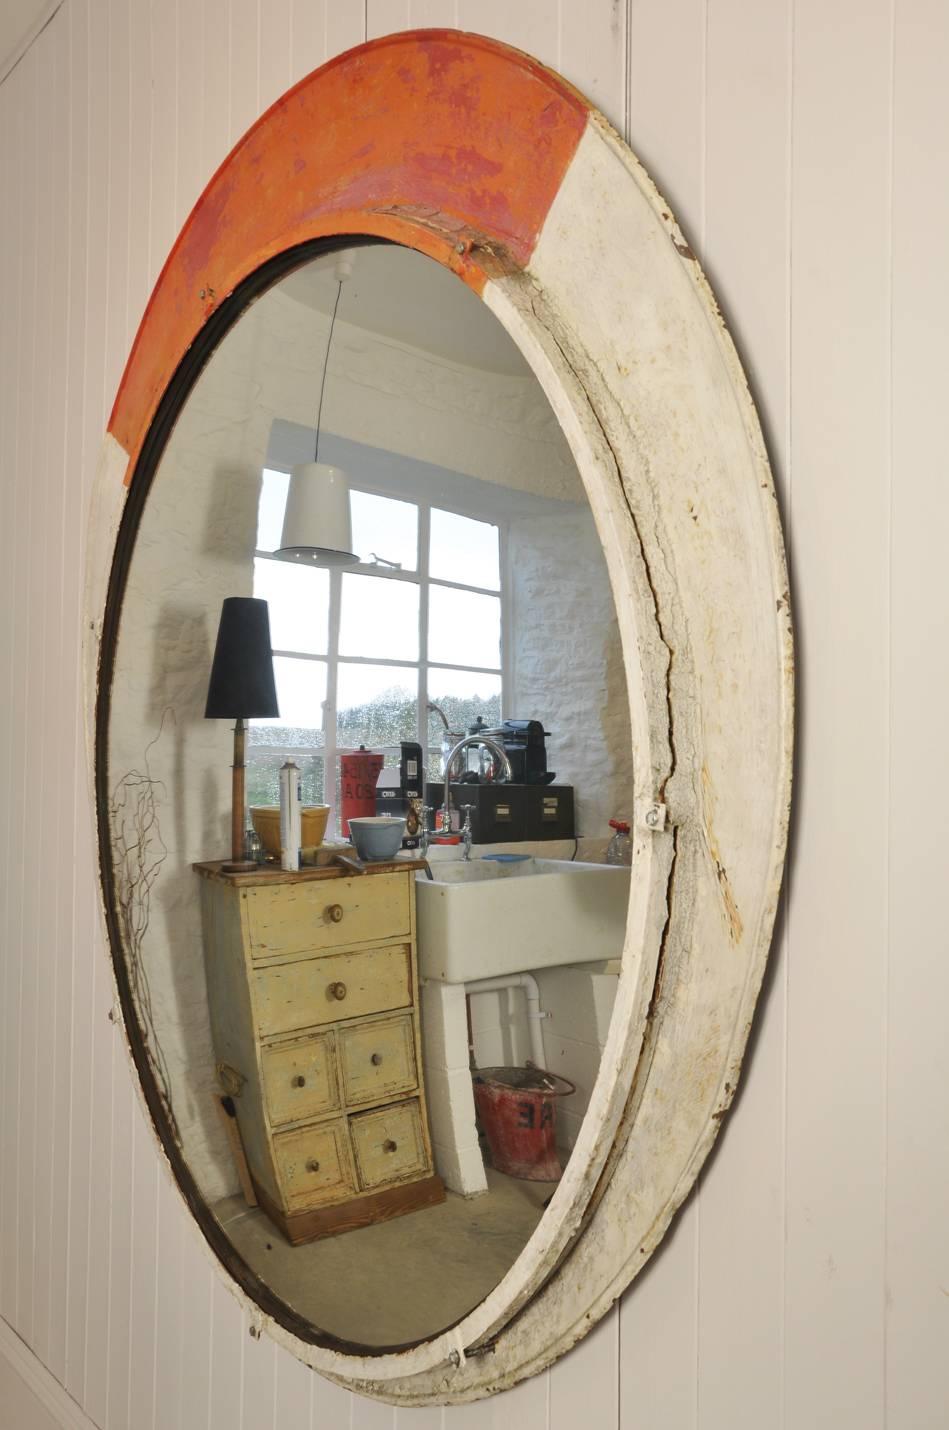 These awesome Industrial convex mirrors have come from the tram system in Prague.

Very big in size and impressive, these look fantastic in the right setting.

We have added a metal bar for hanging please bear in mind that these are very